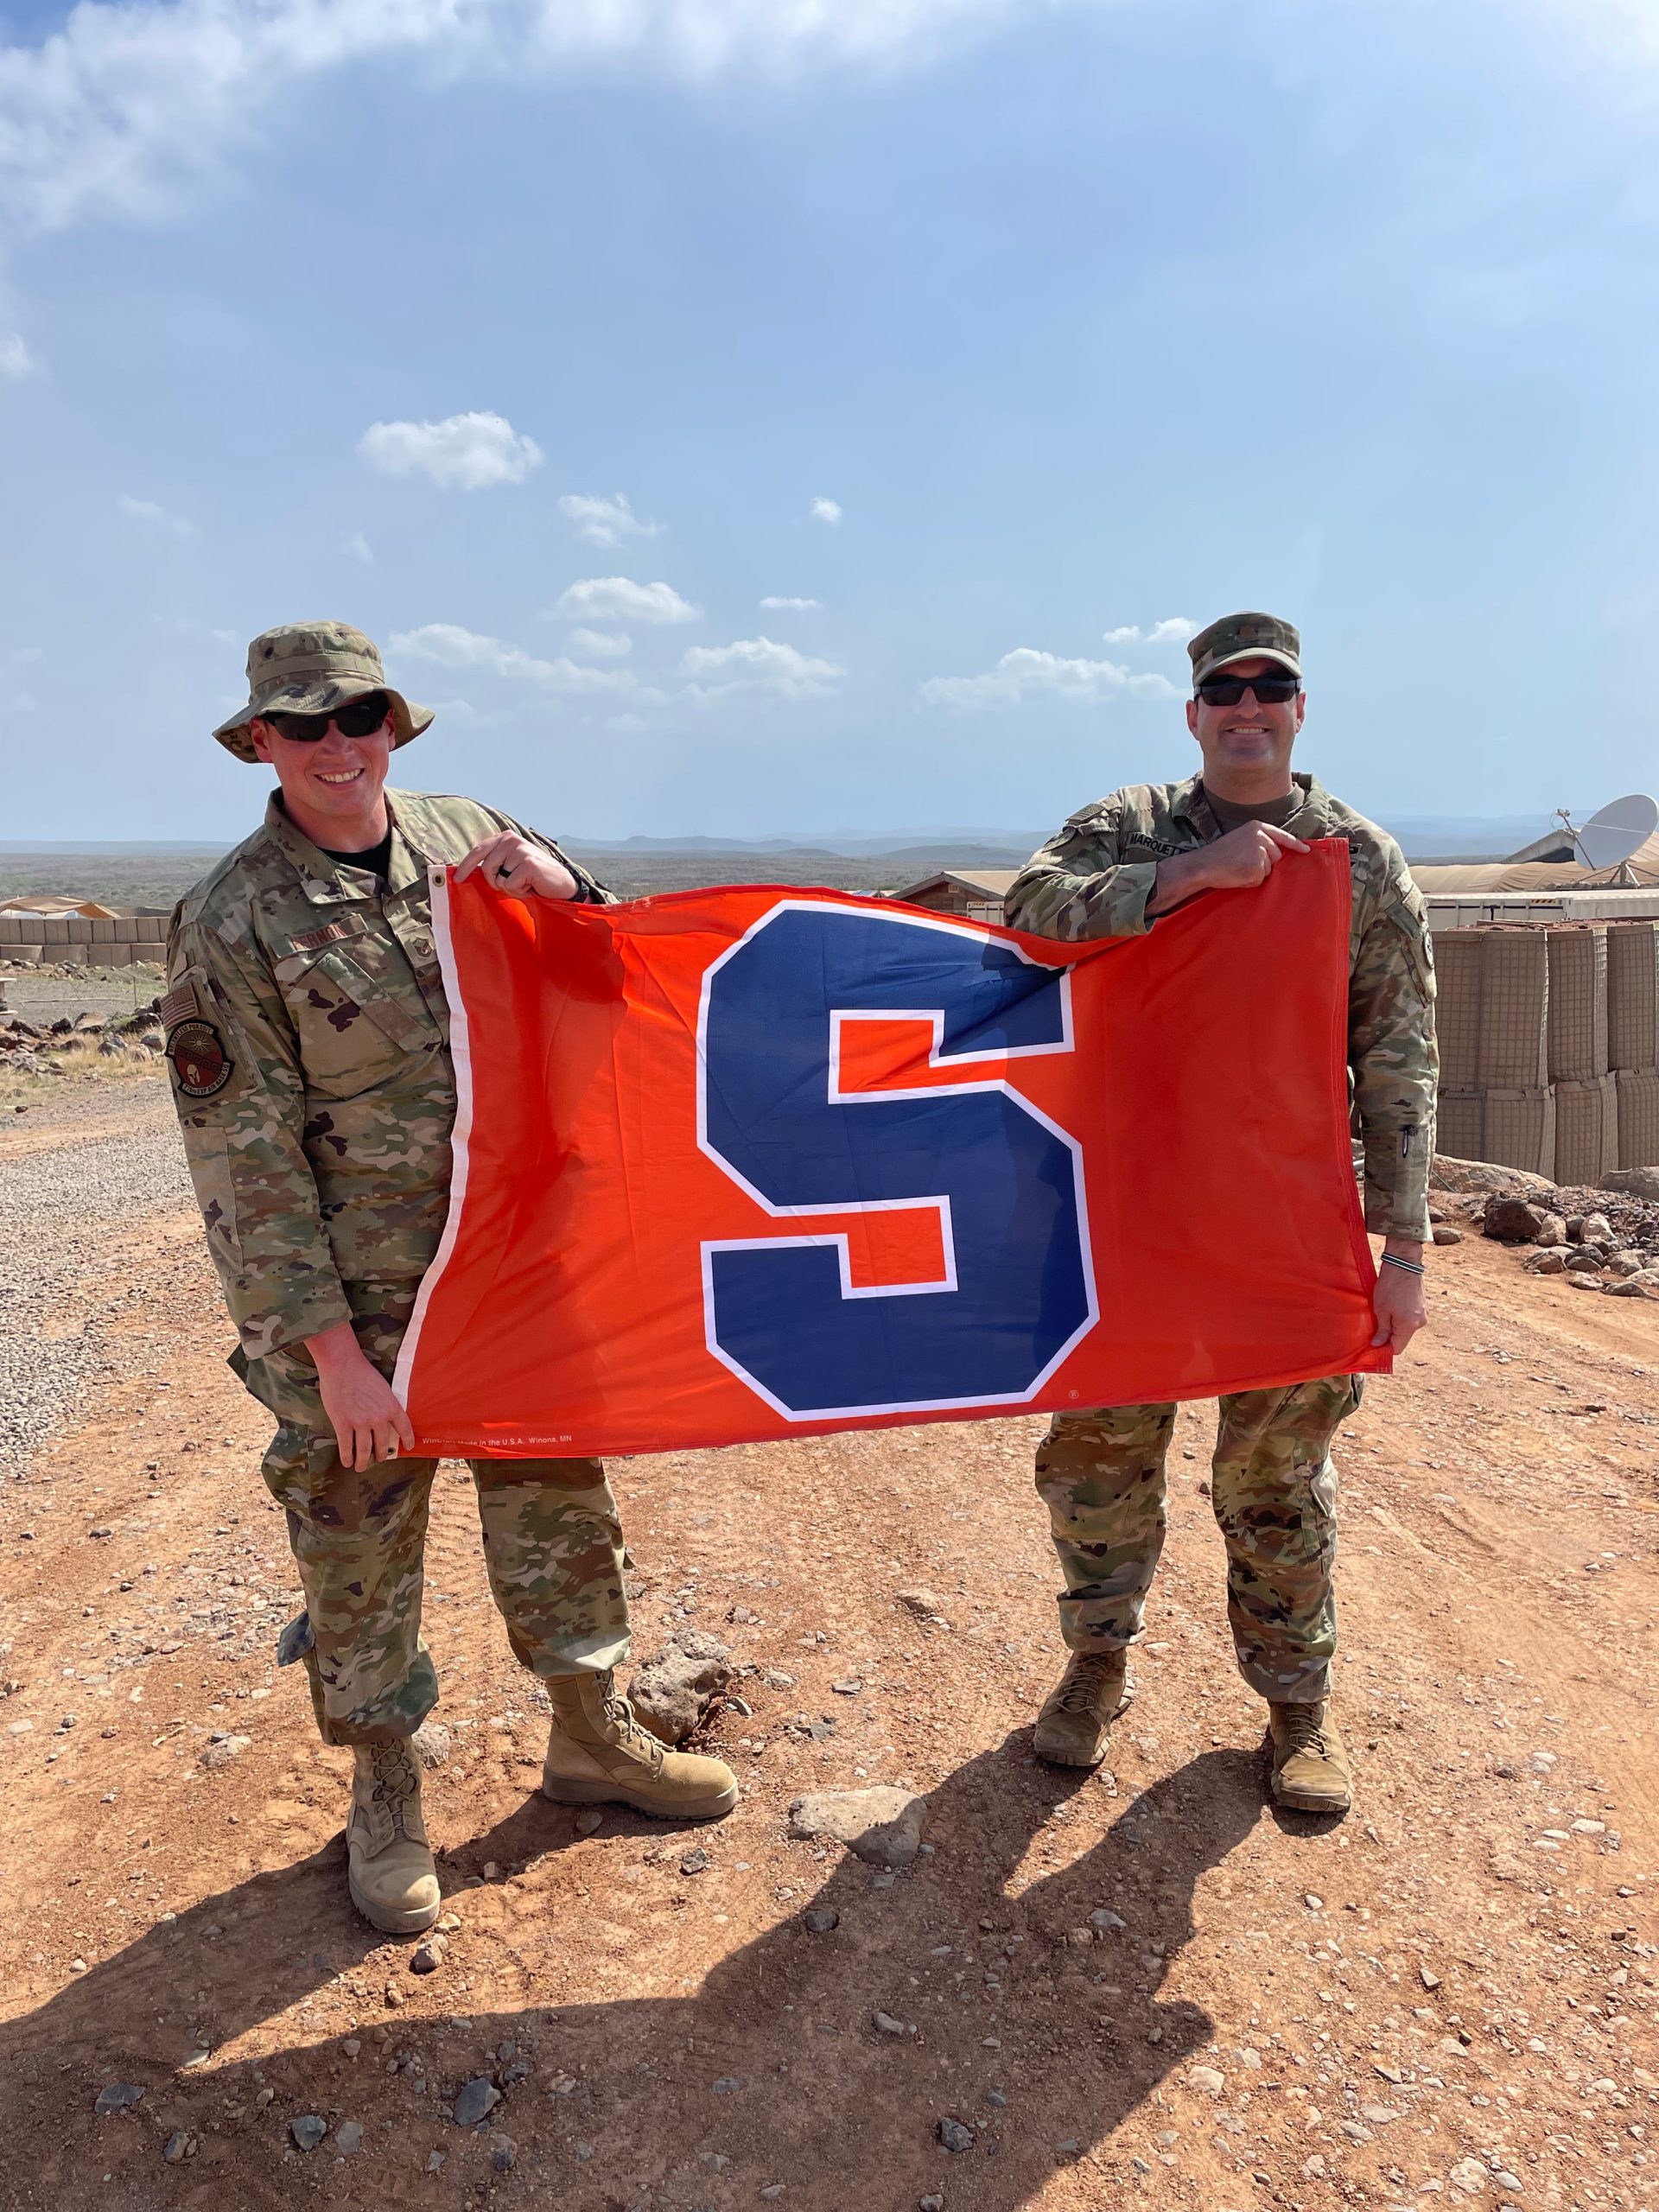 Two individuals in military uniform standing together holding a orange and blue Syracuse flag.